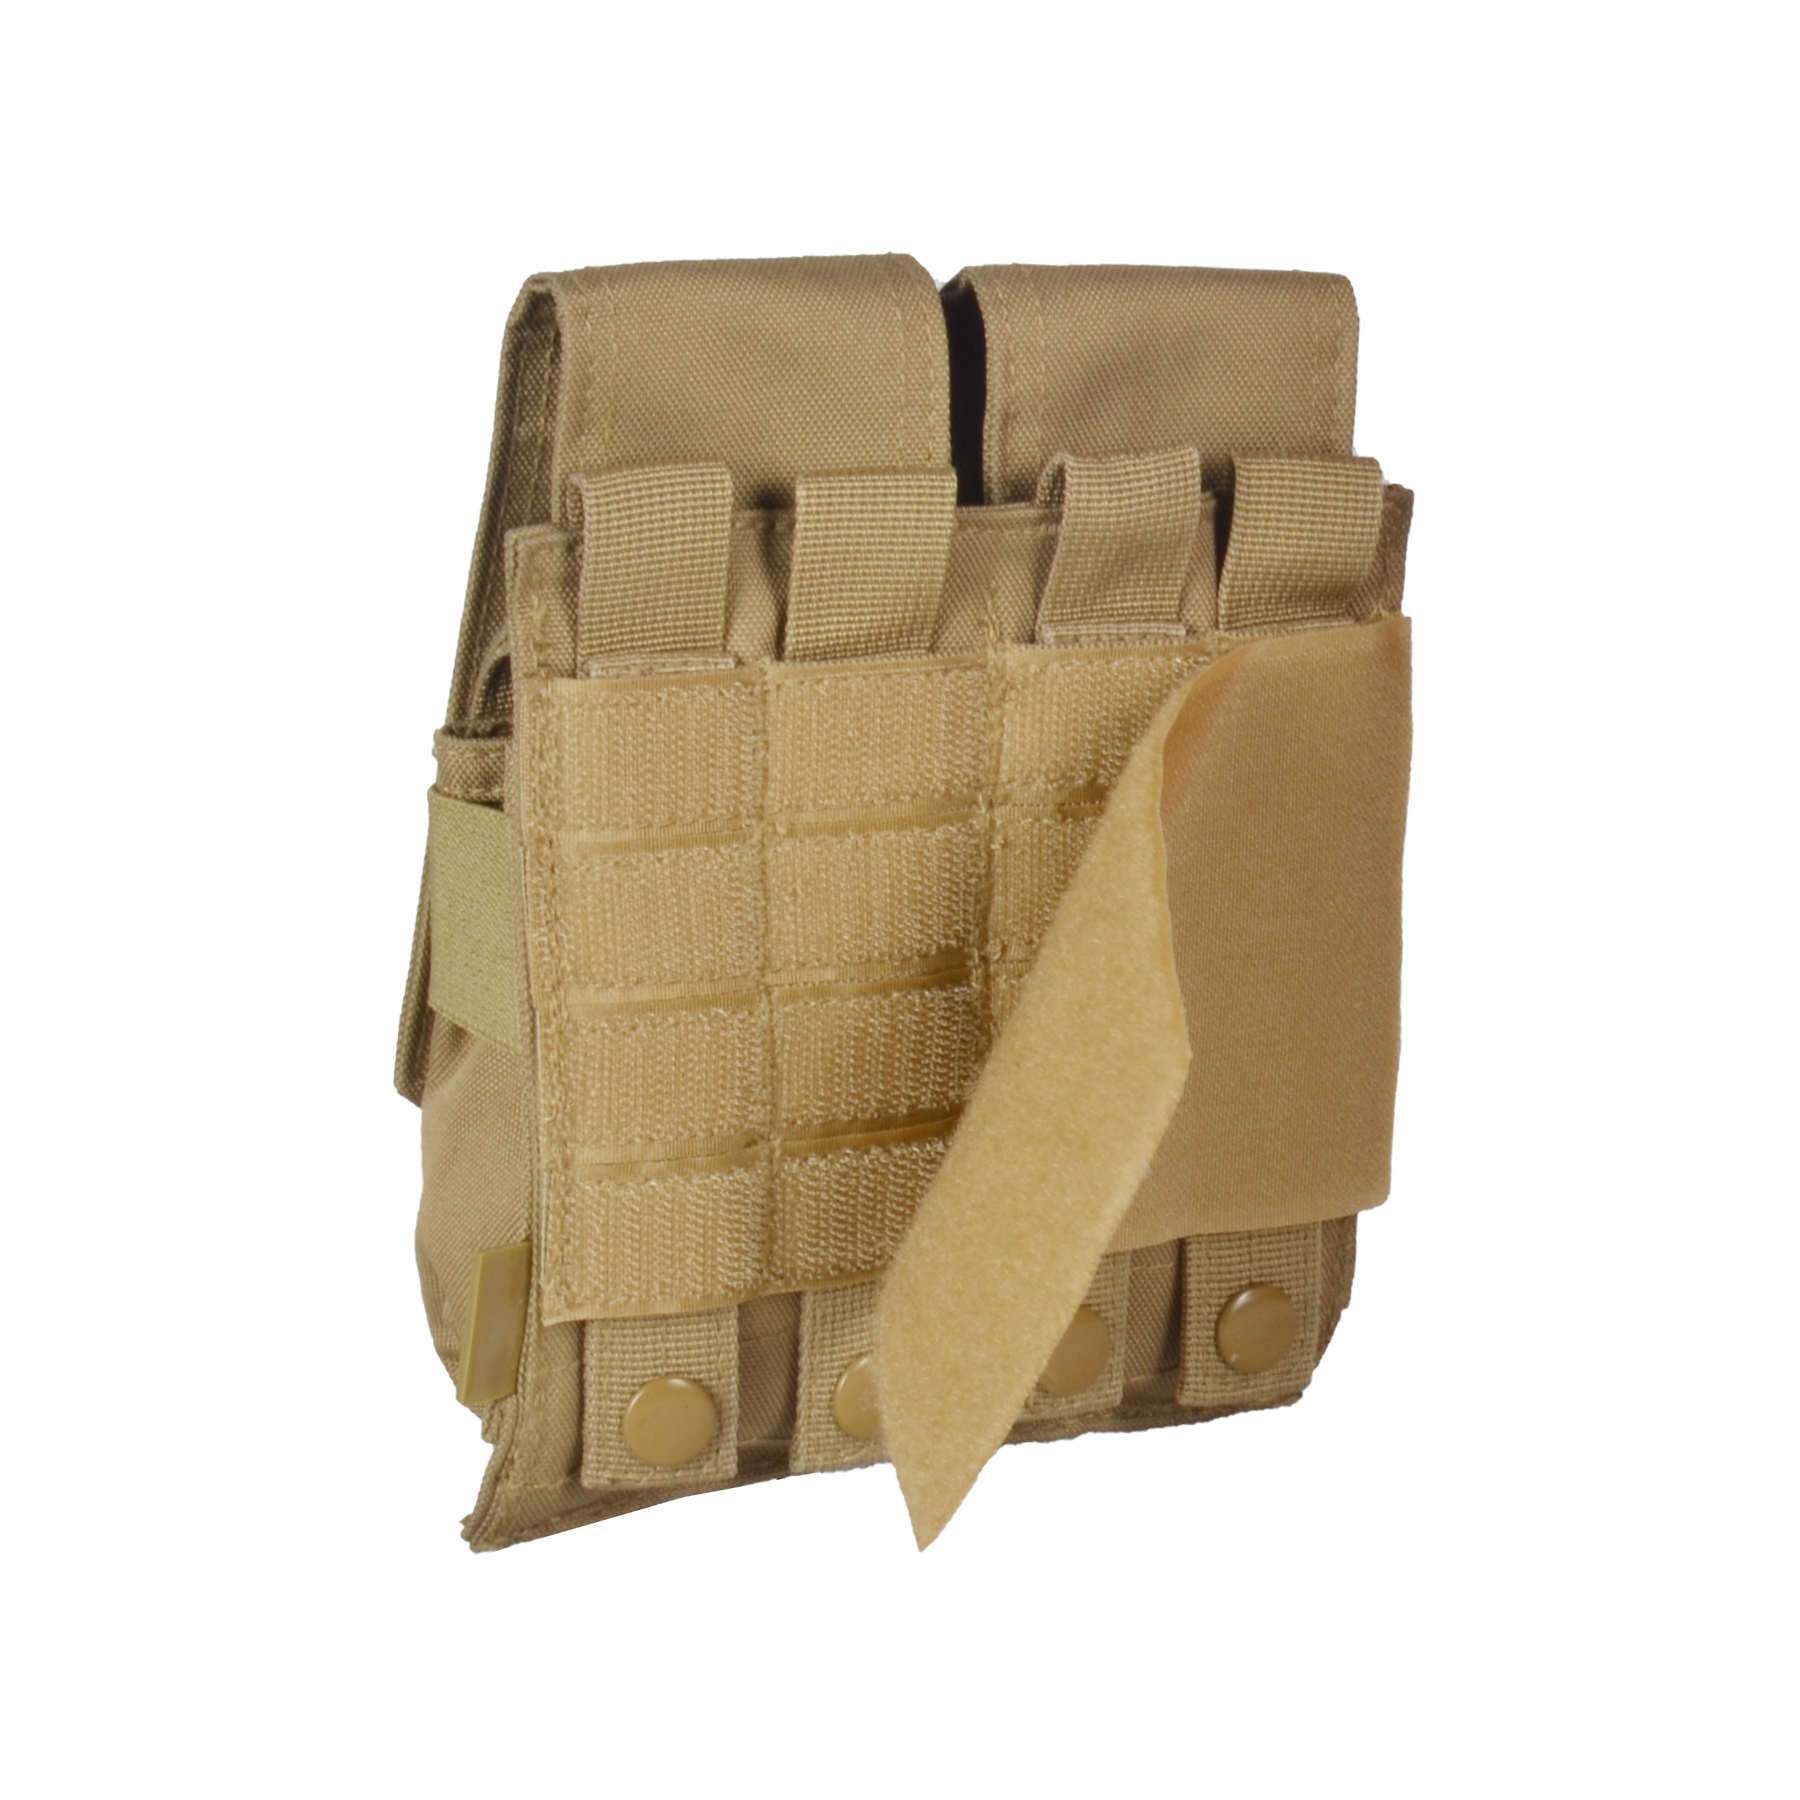 Double Universal Rifle Mag Pouch-7381